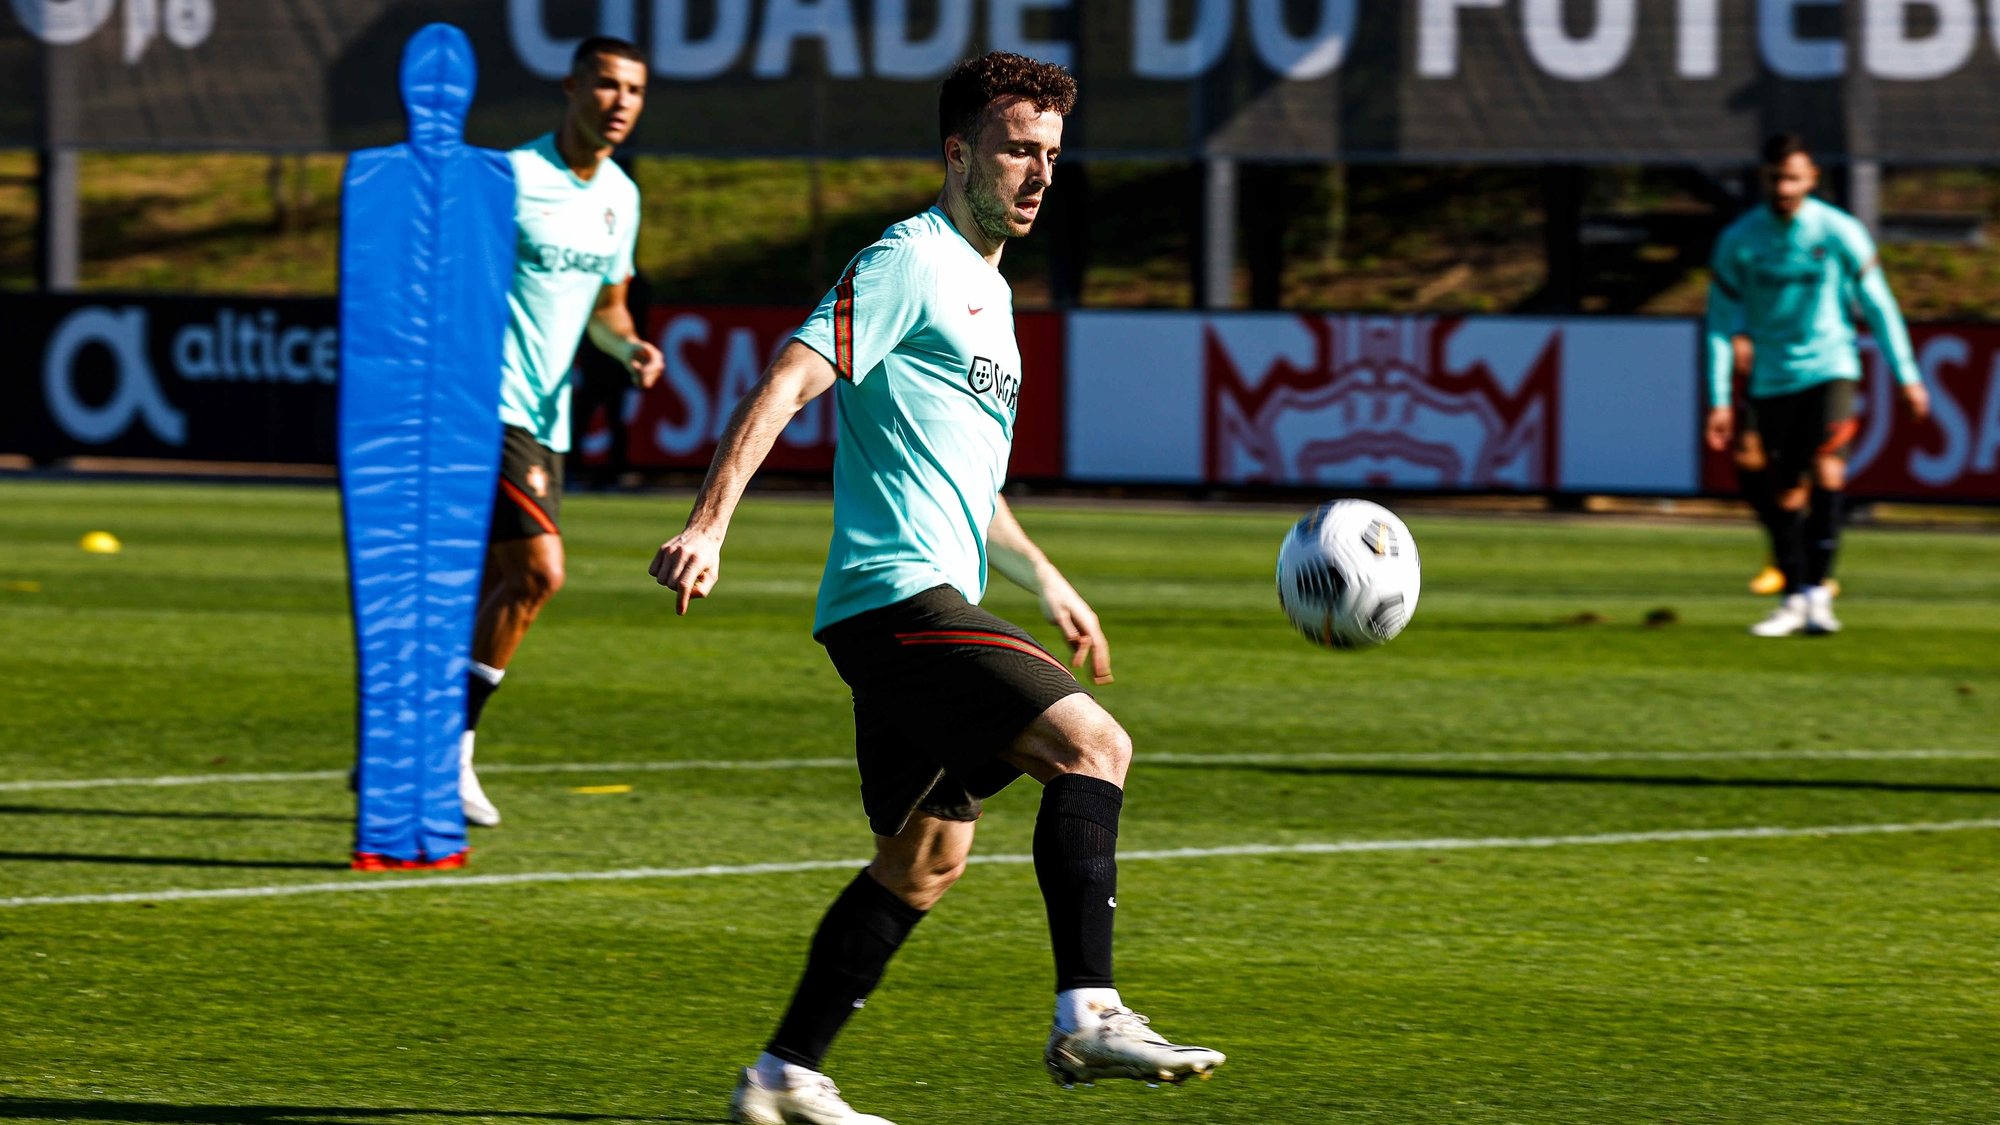 Portuguese Soccer Federation (FPF) handout picture of the Portuguese national soccer team player, Raphael Guerreiro, during a training session for the upcoming match with Andorra to be played tomorrow, Oeiras, Portugal, 10 November 2020.  DIOGO PINTO/FPF/LUSA